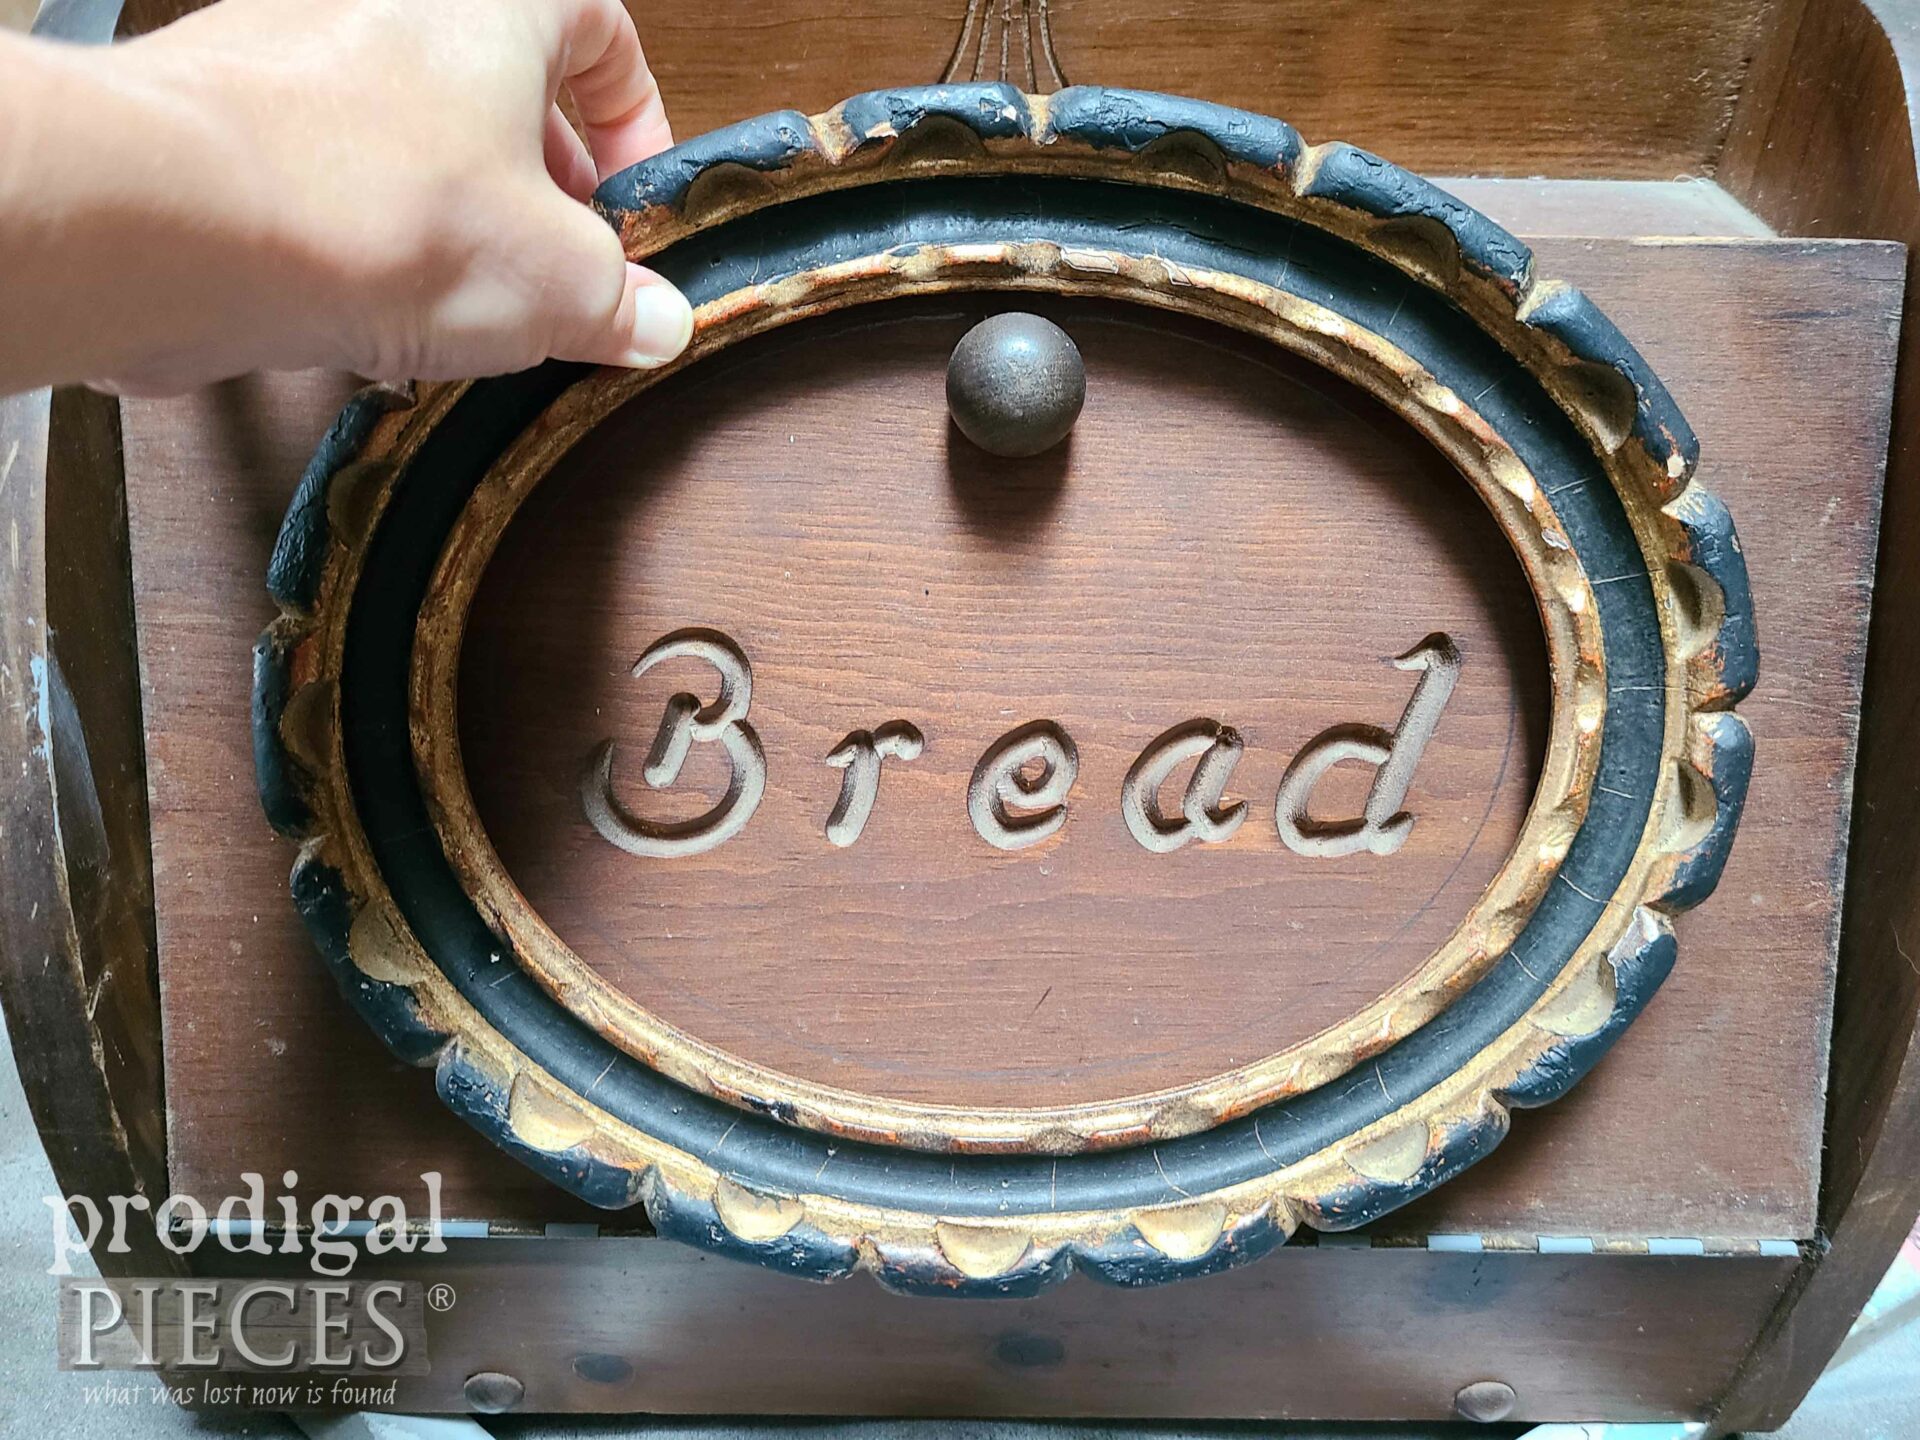 Tracing Wooden Oval on Vintage Bread Box | prodigalpieces.com #prodigalpieces